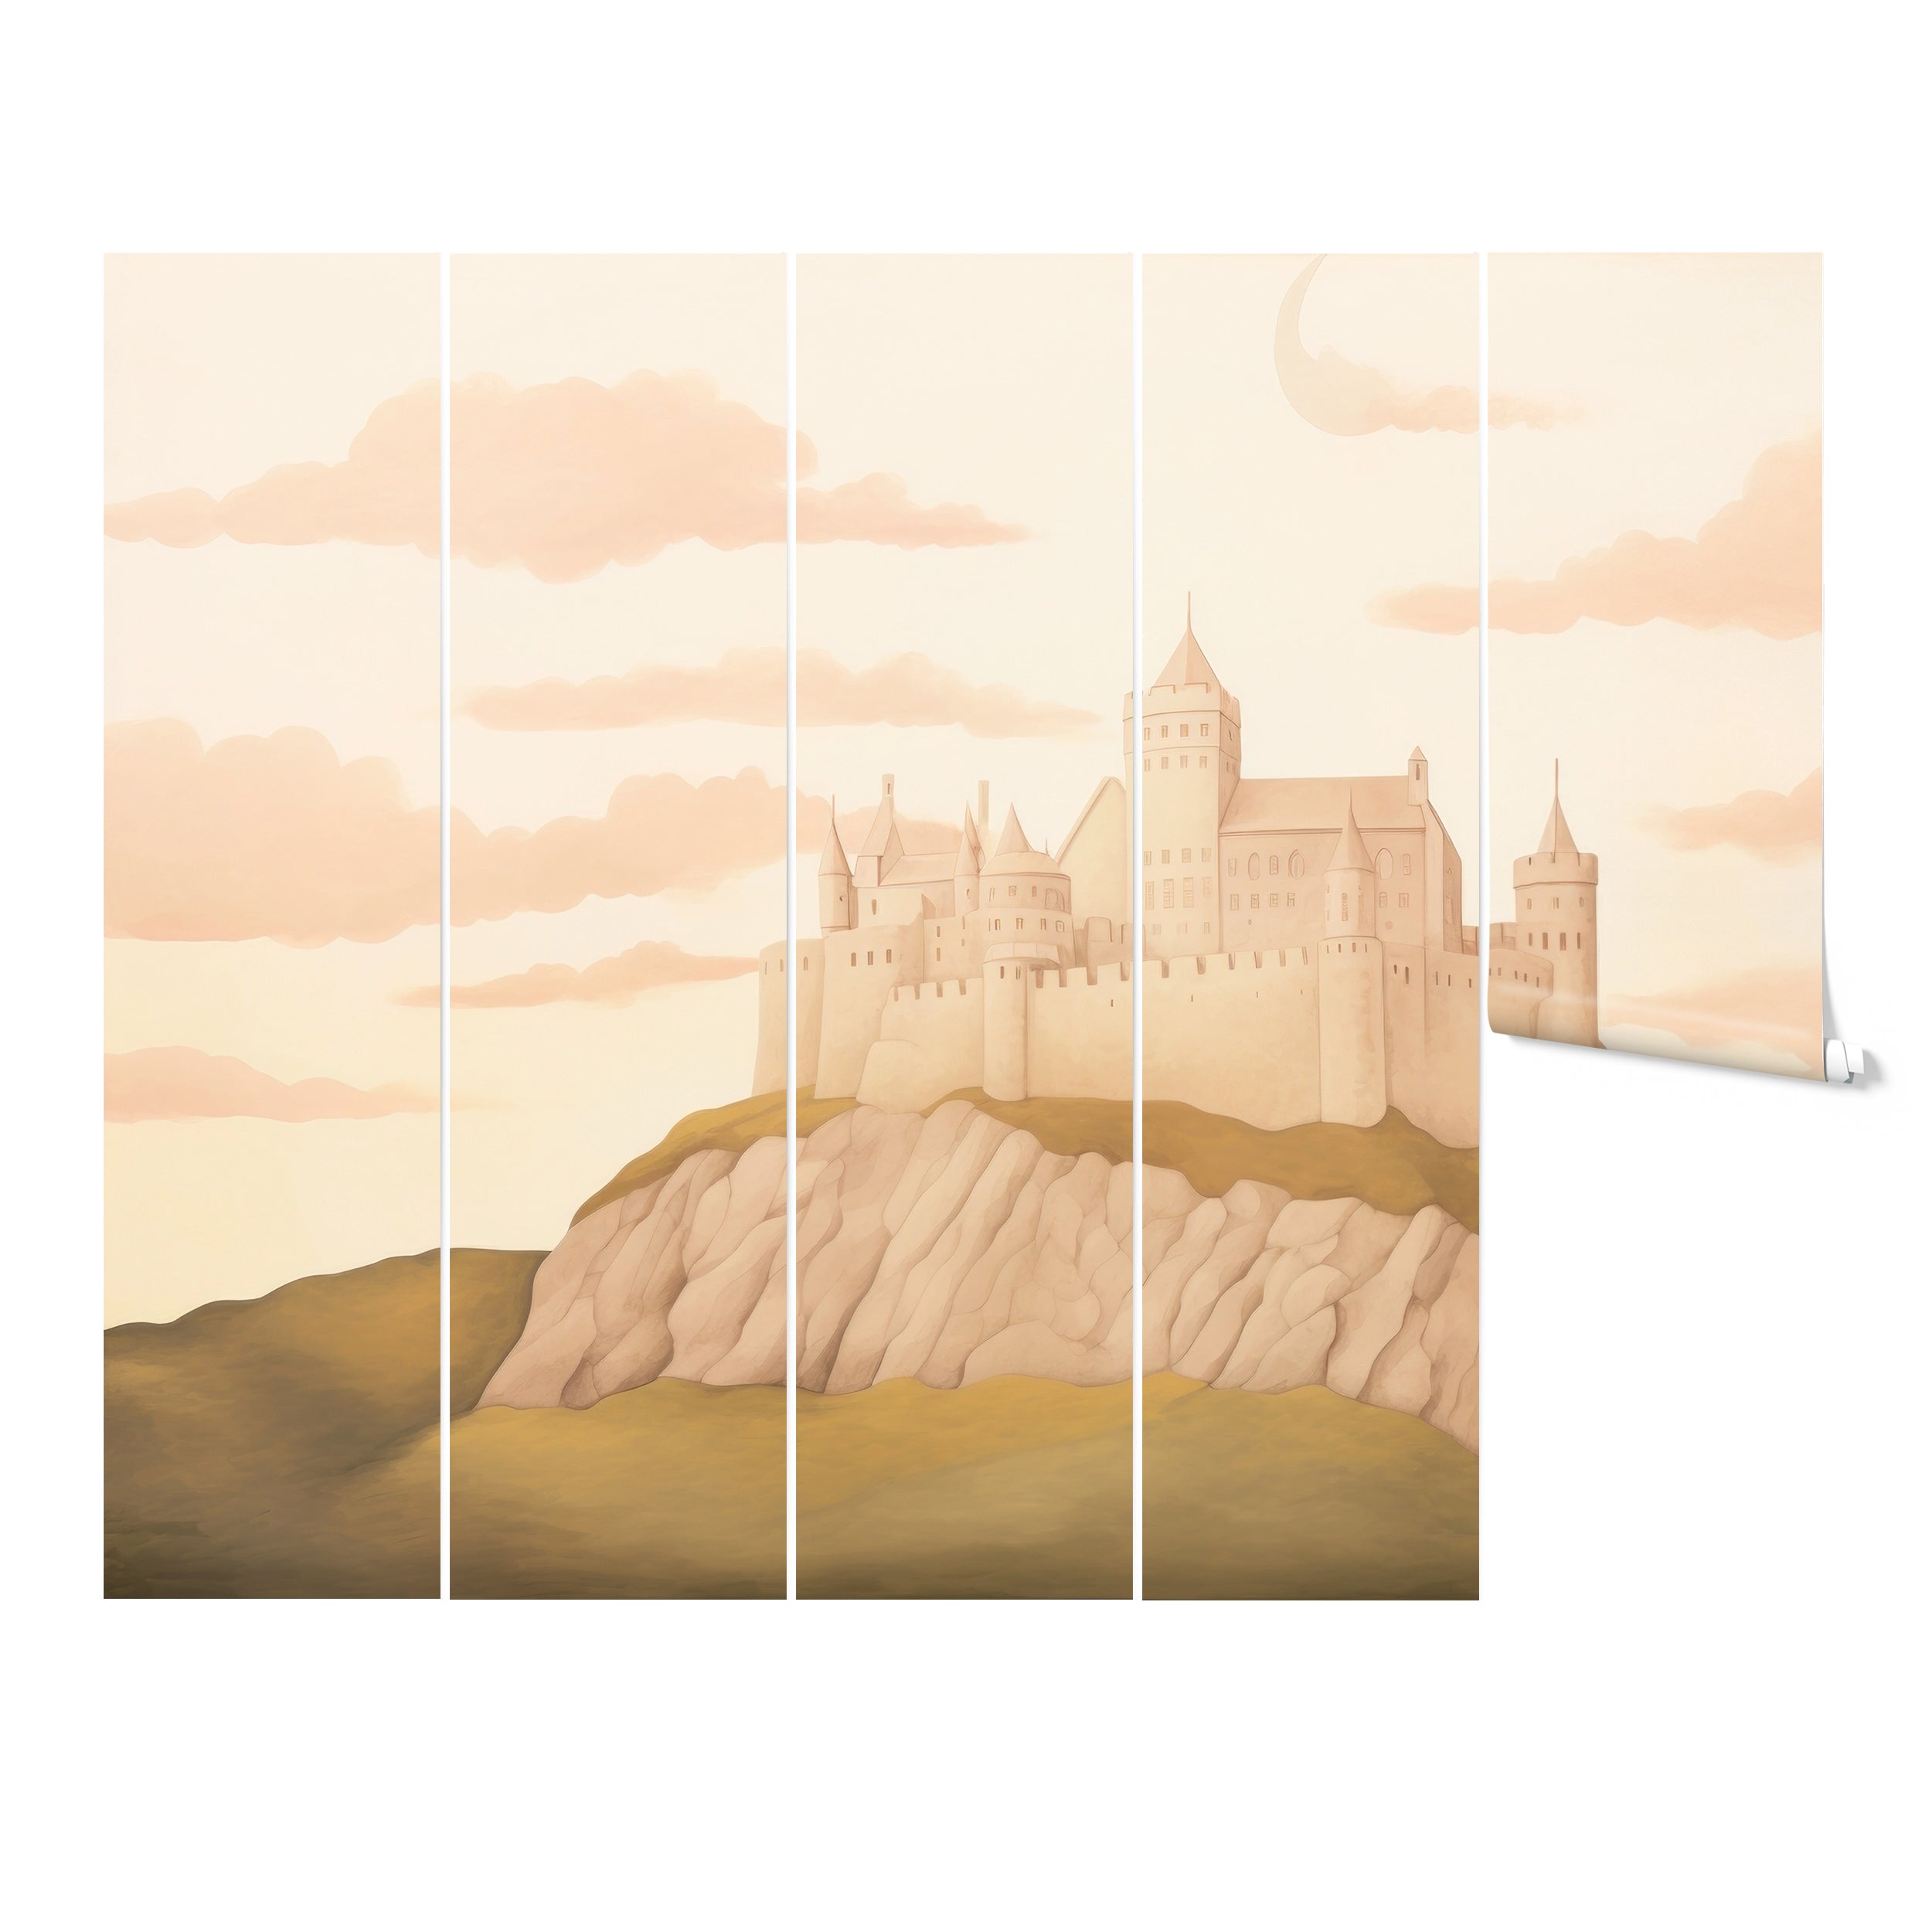 Packaged rolls of pastel castle mural wallpaper featuring a dreamy castle design for home decoration."